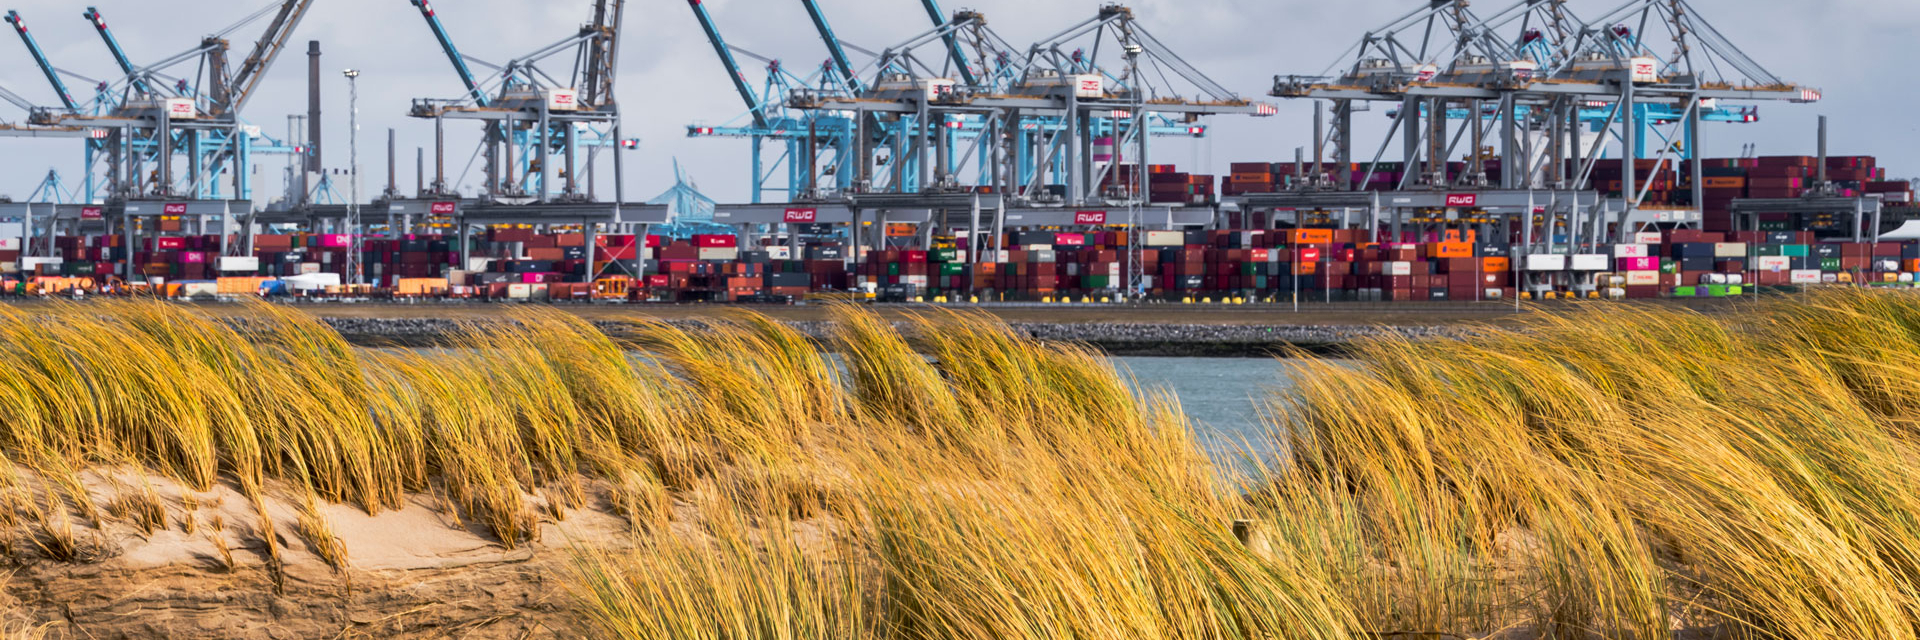 NGRP_Maasvlakte_Containers